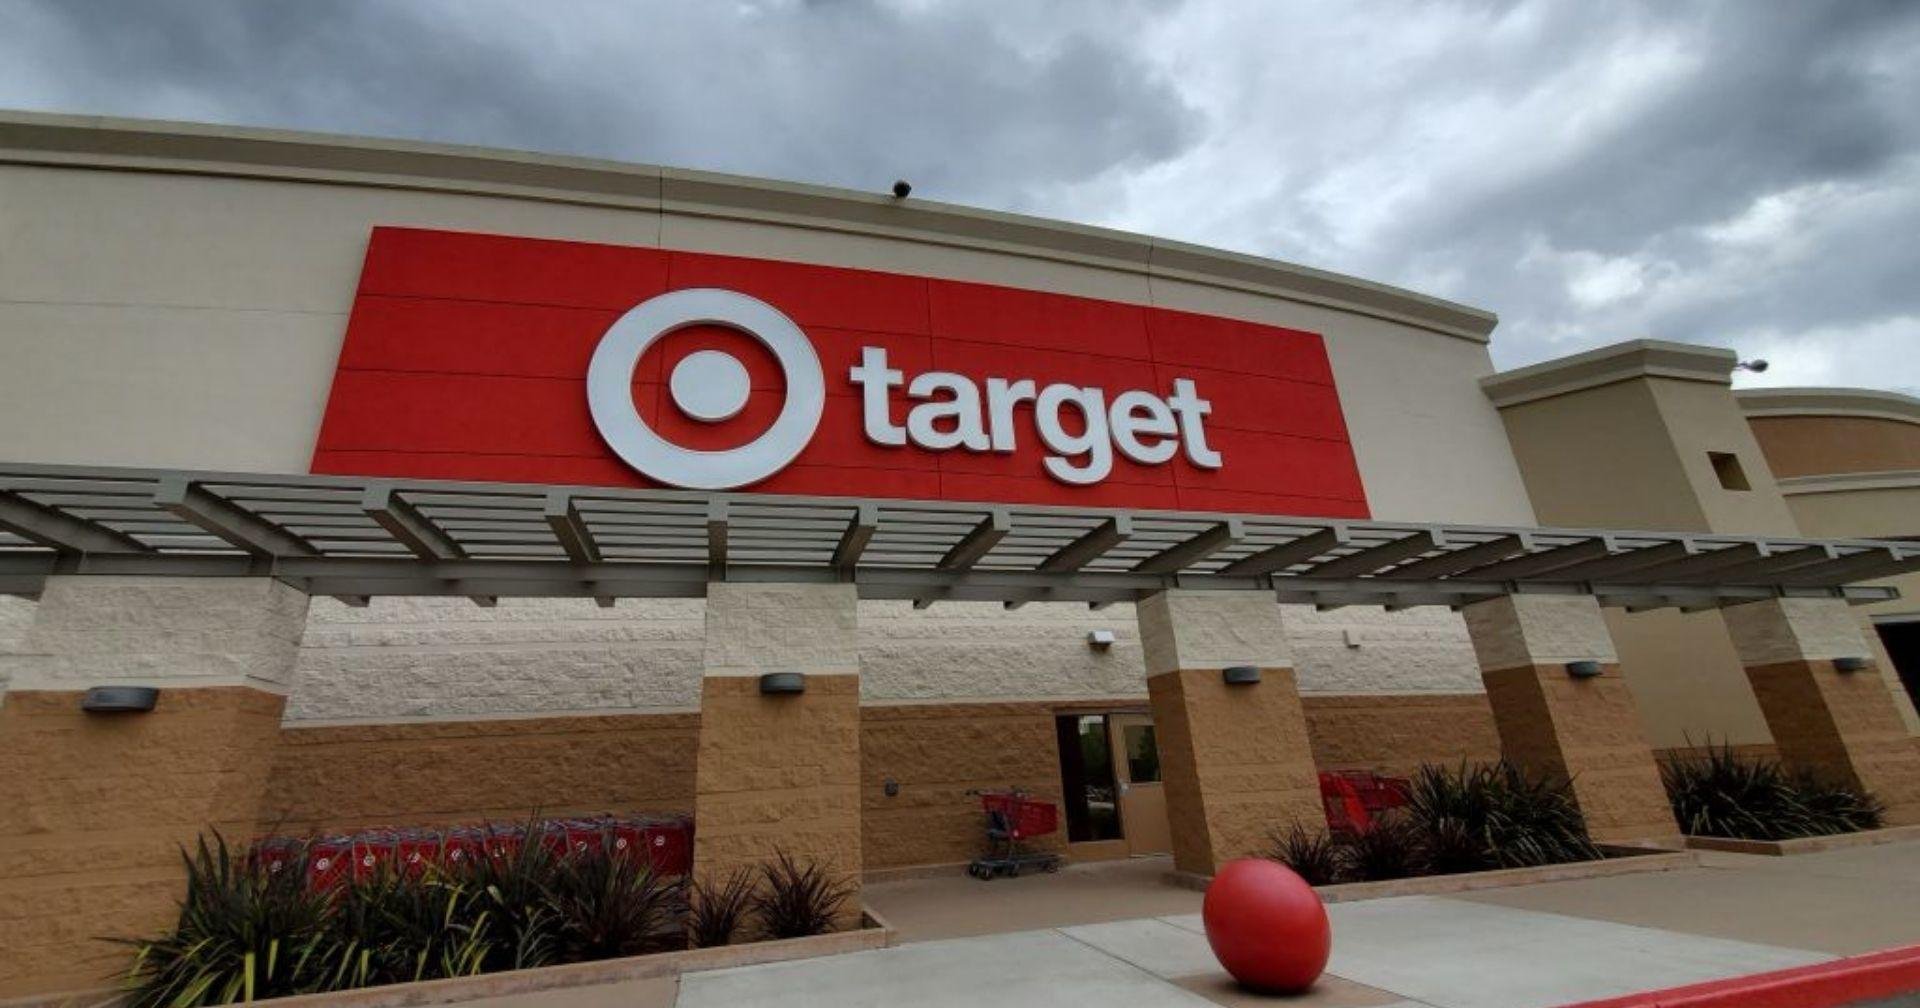 21 Tips to Save the Most At Target